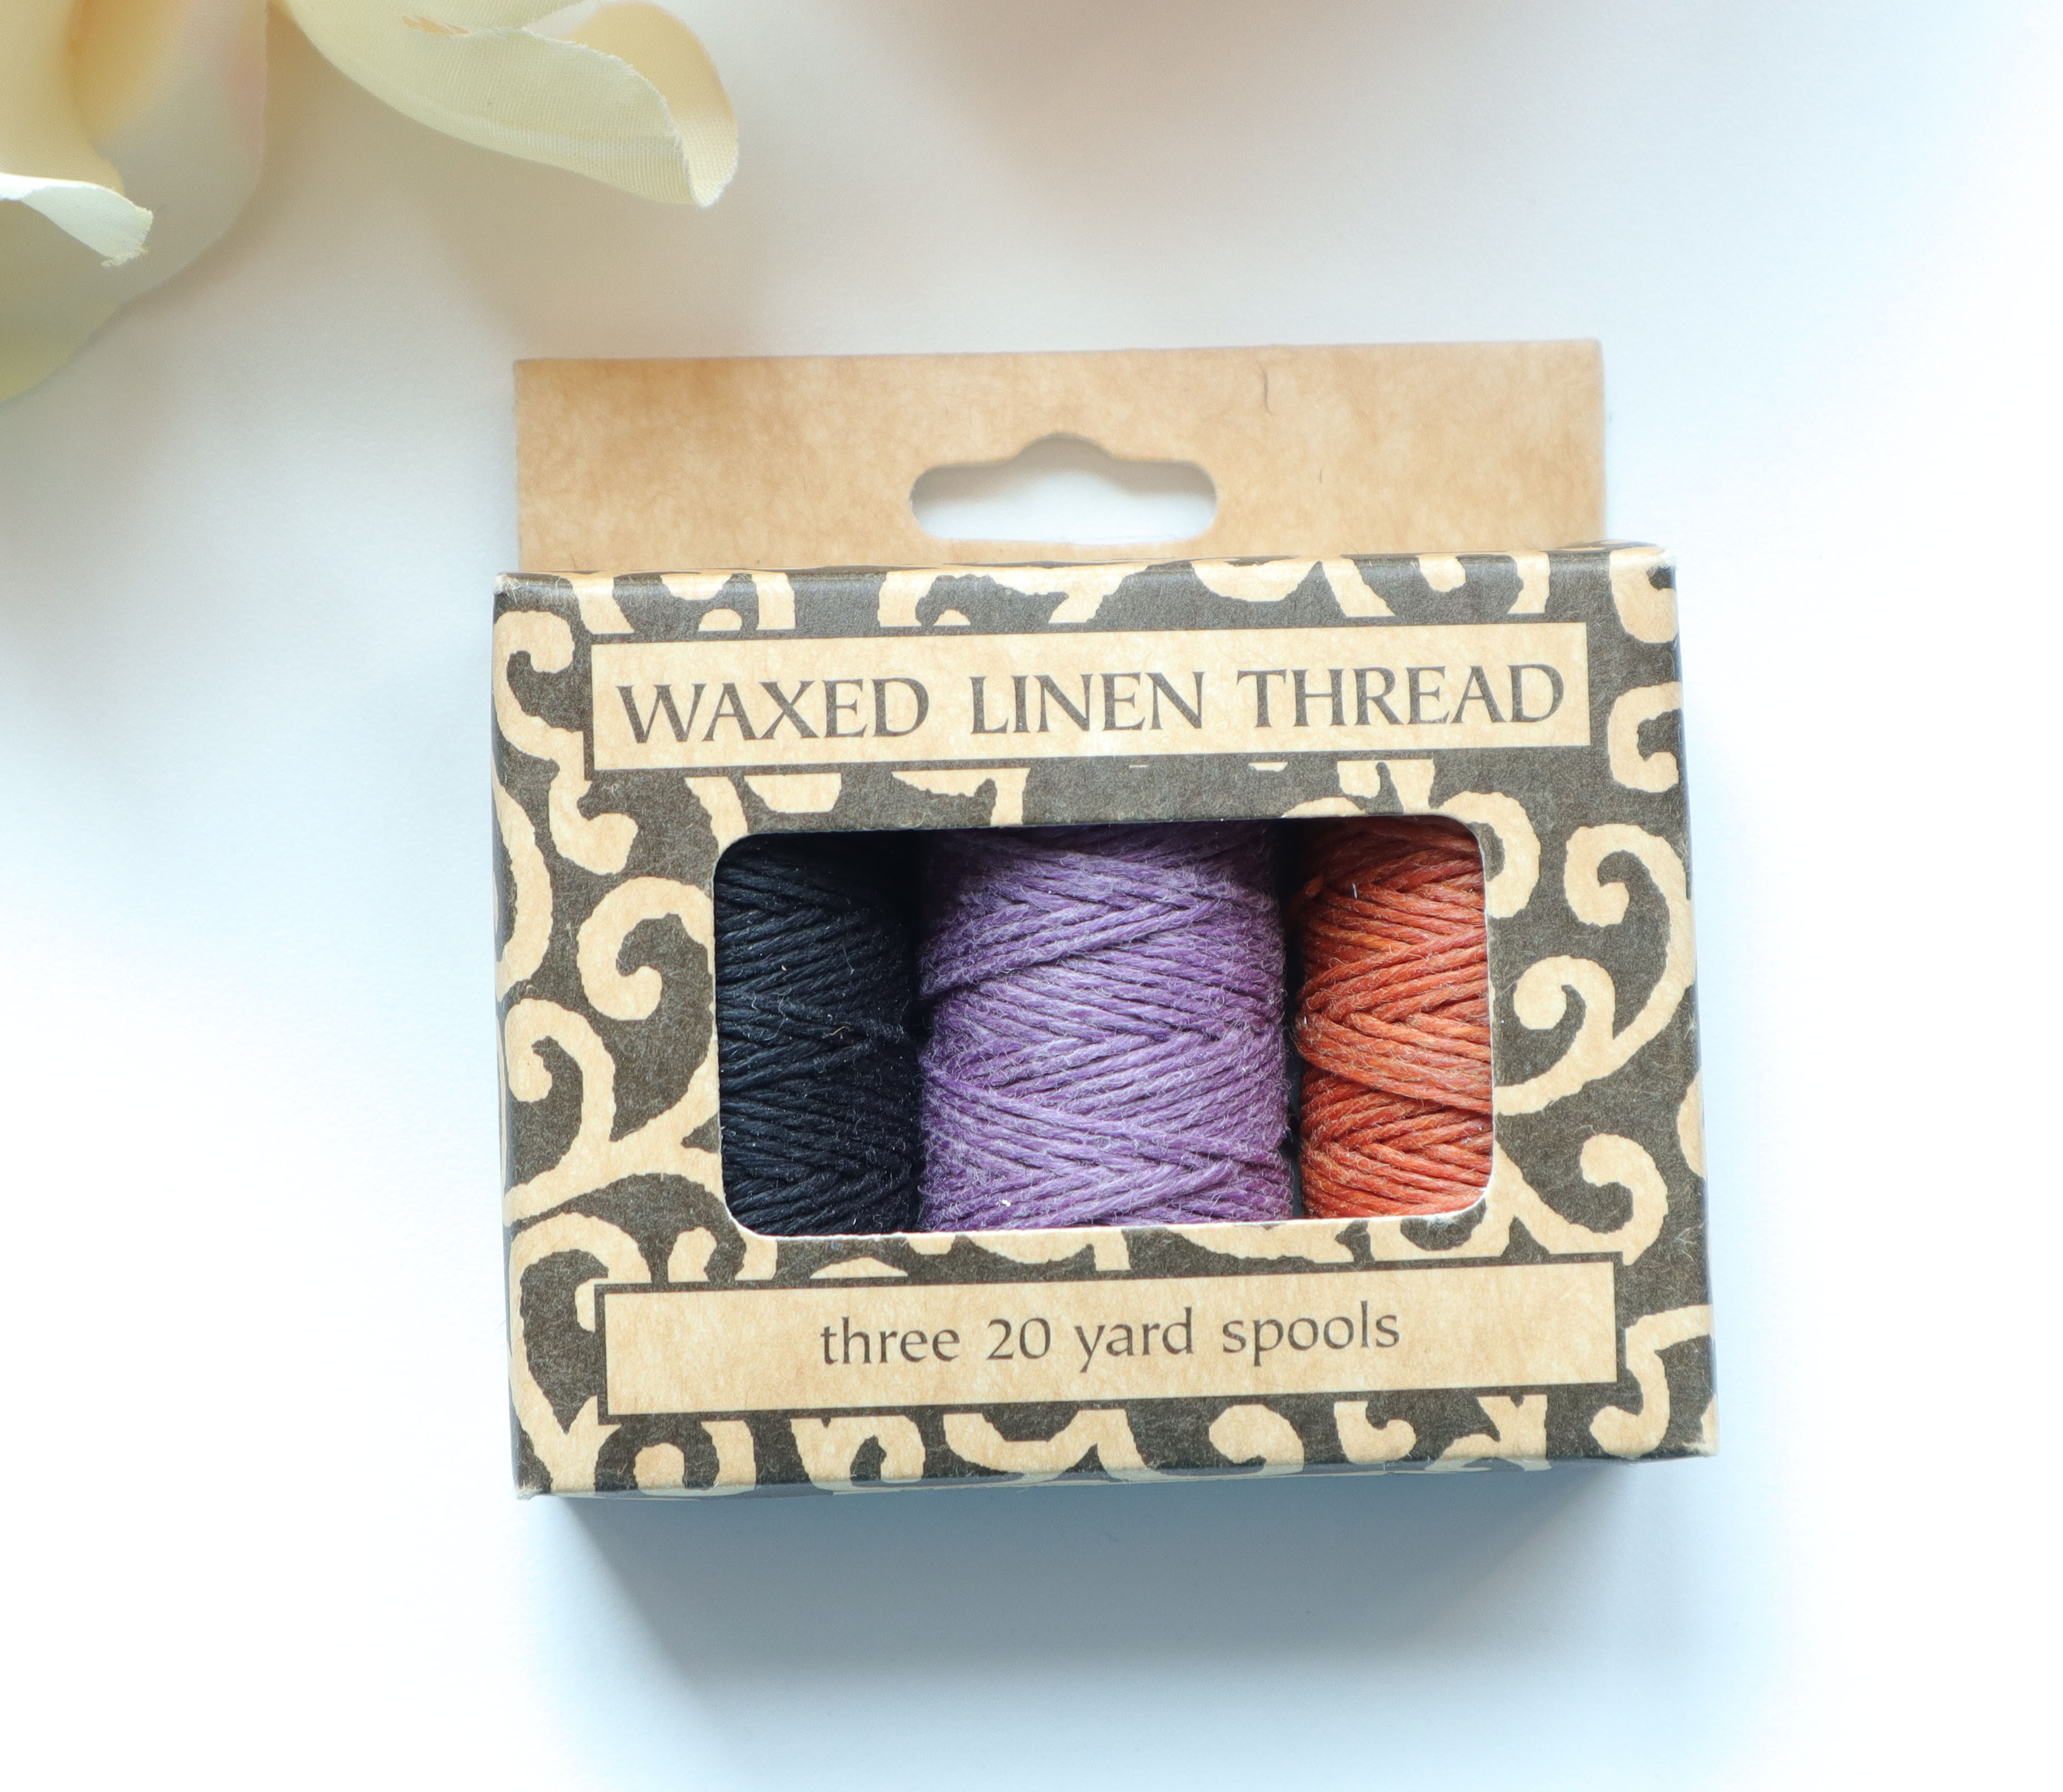 lineco 5 ply waxed linen thread in box with black purple and burnt orange colors